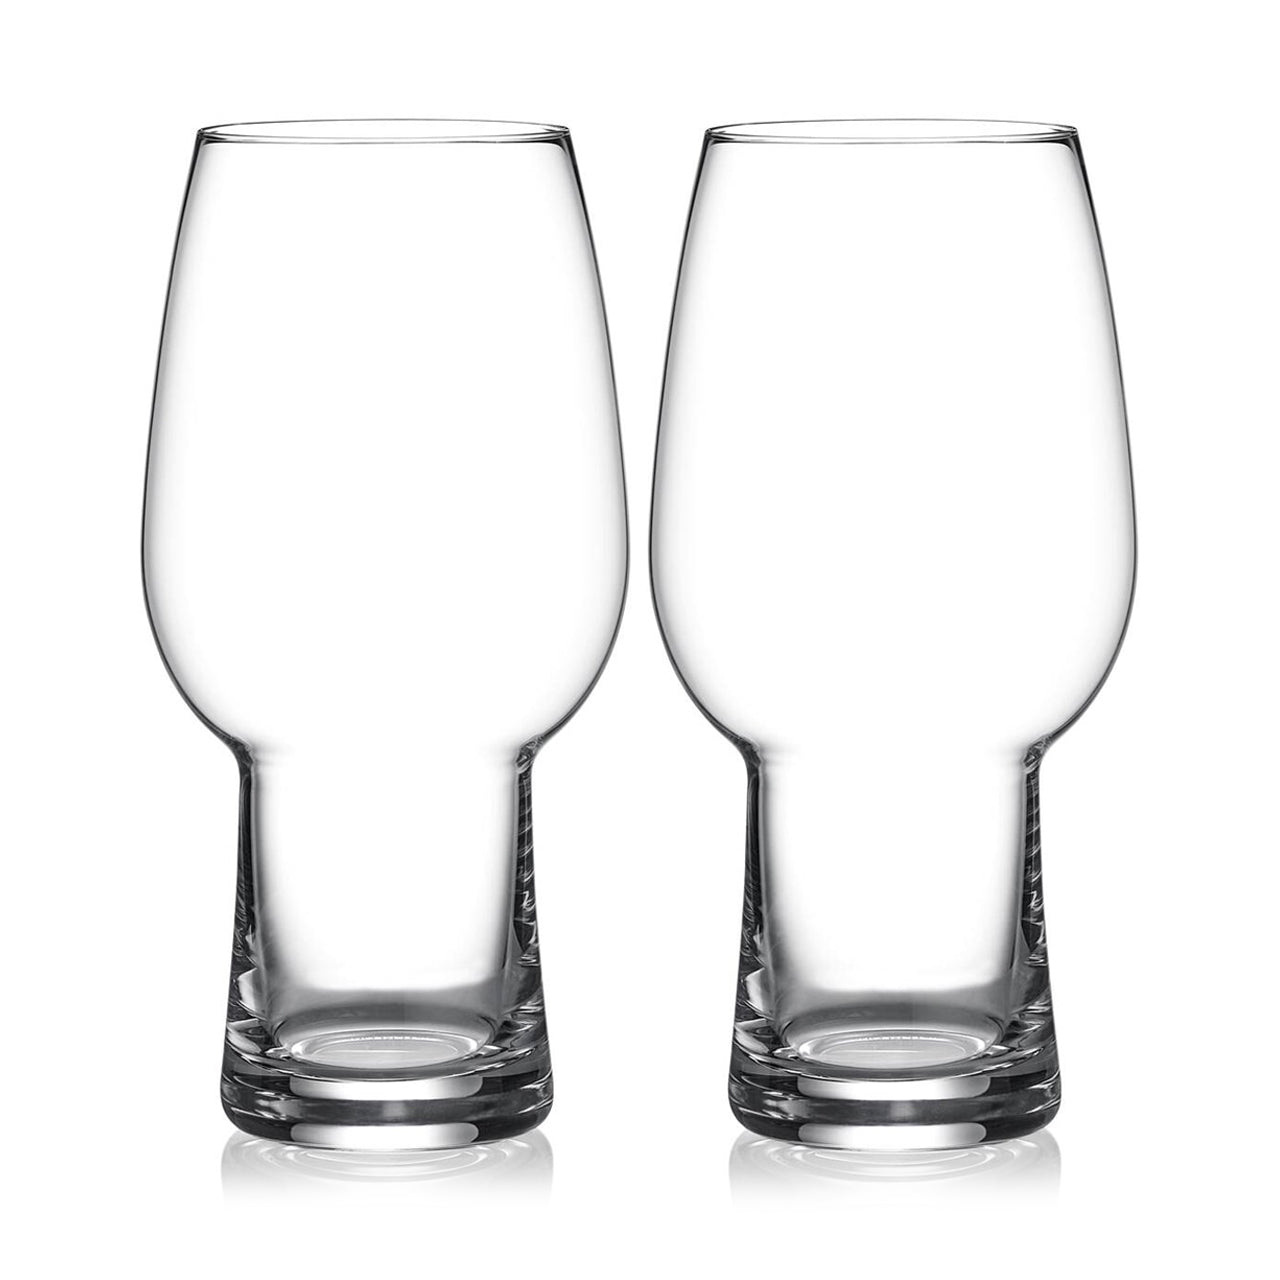 Beer glass CRAFT BEER GLASSES IPA GLASS, set of 4 pcs, 540 ml